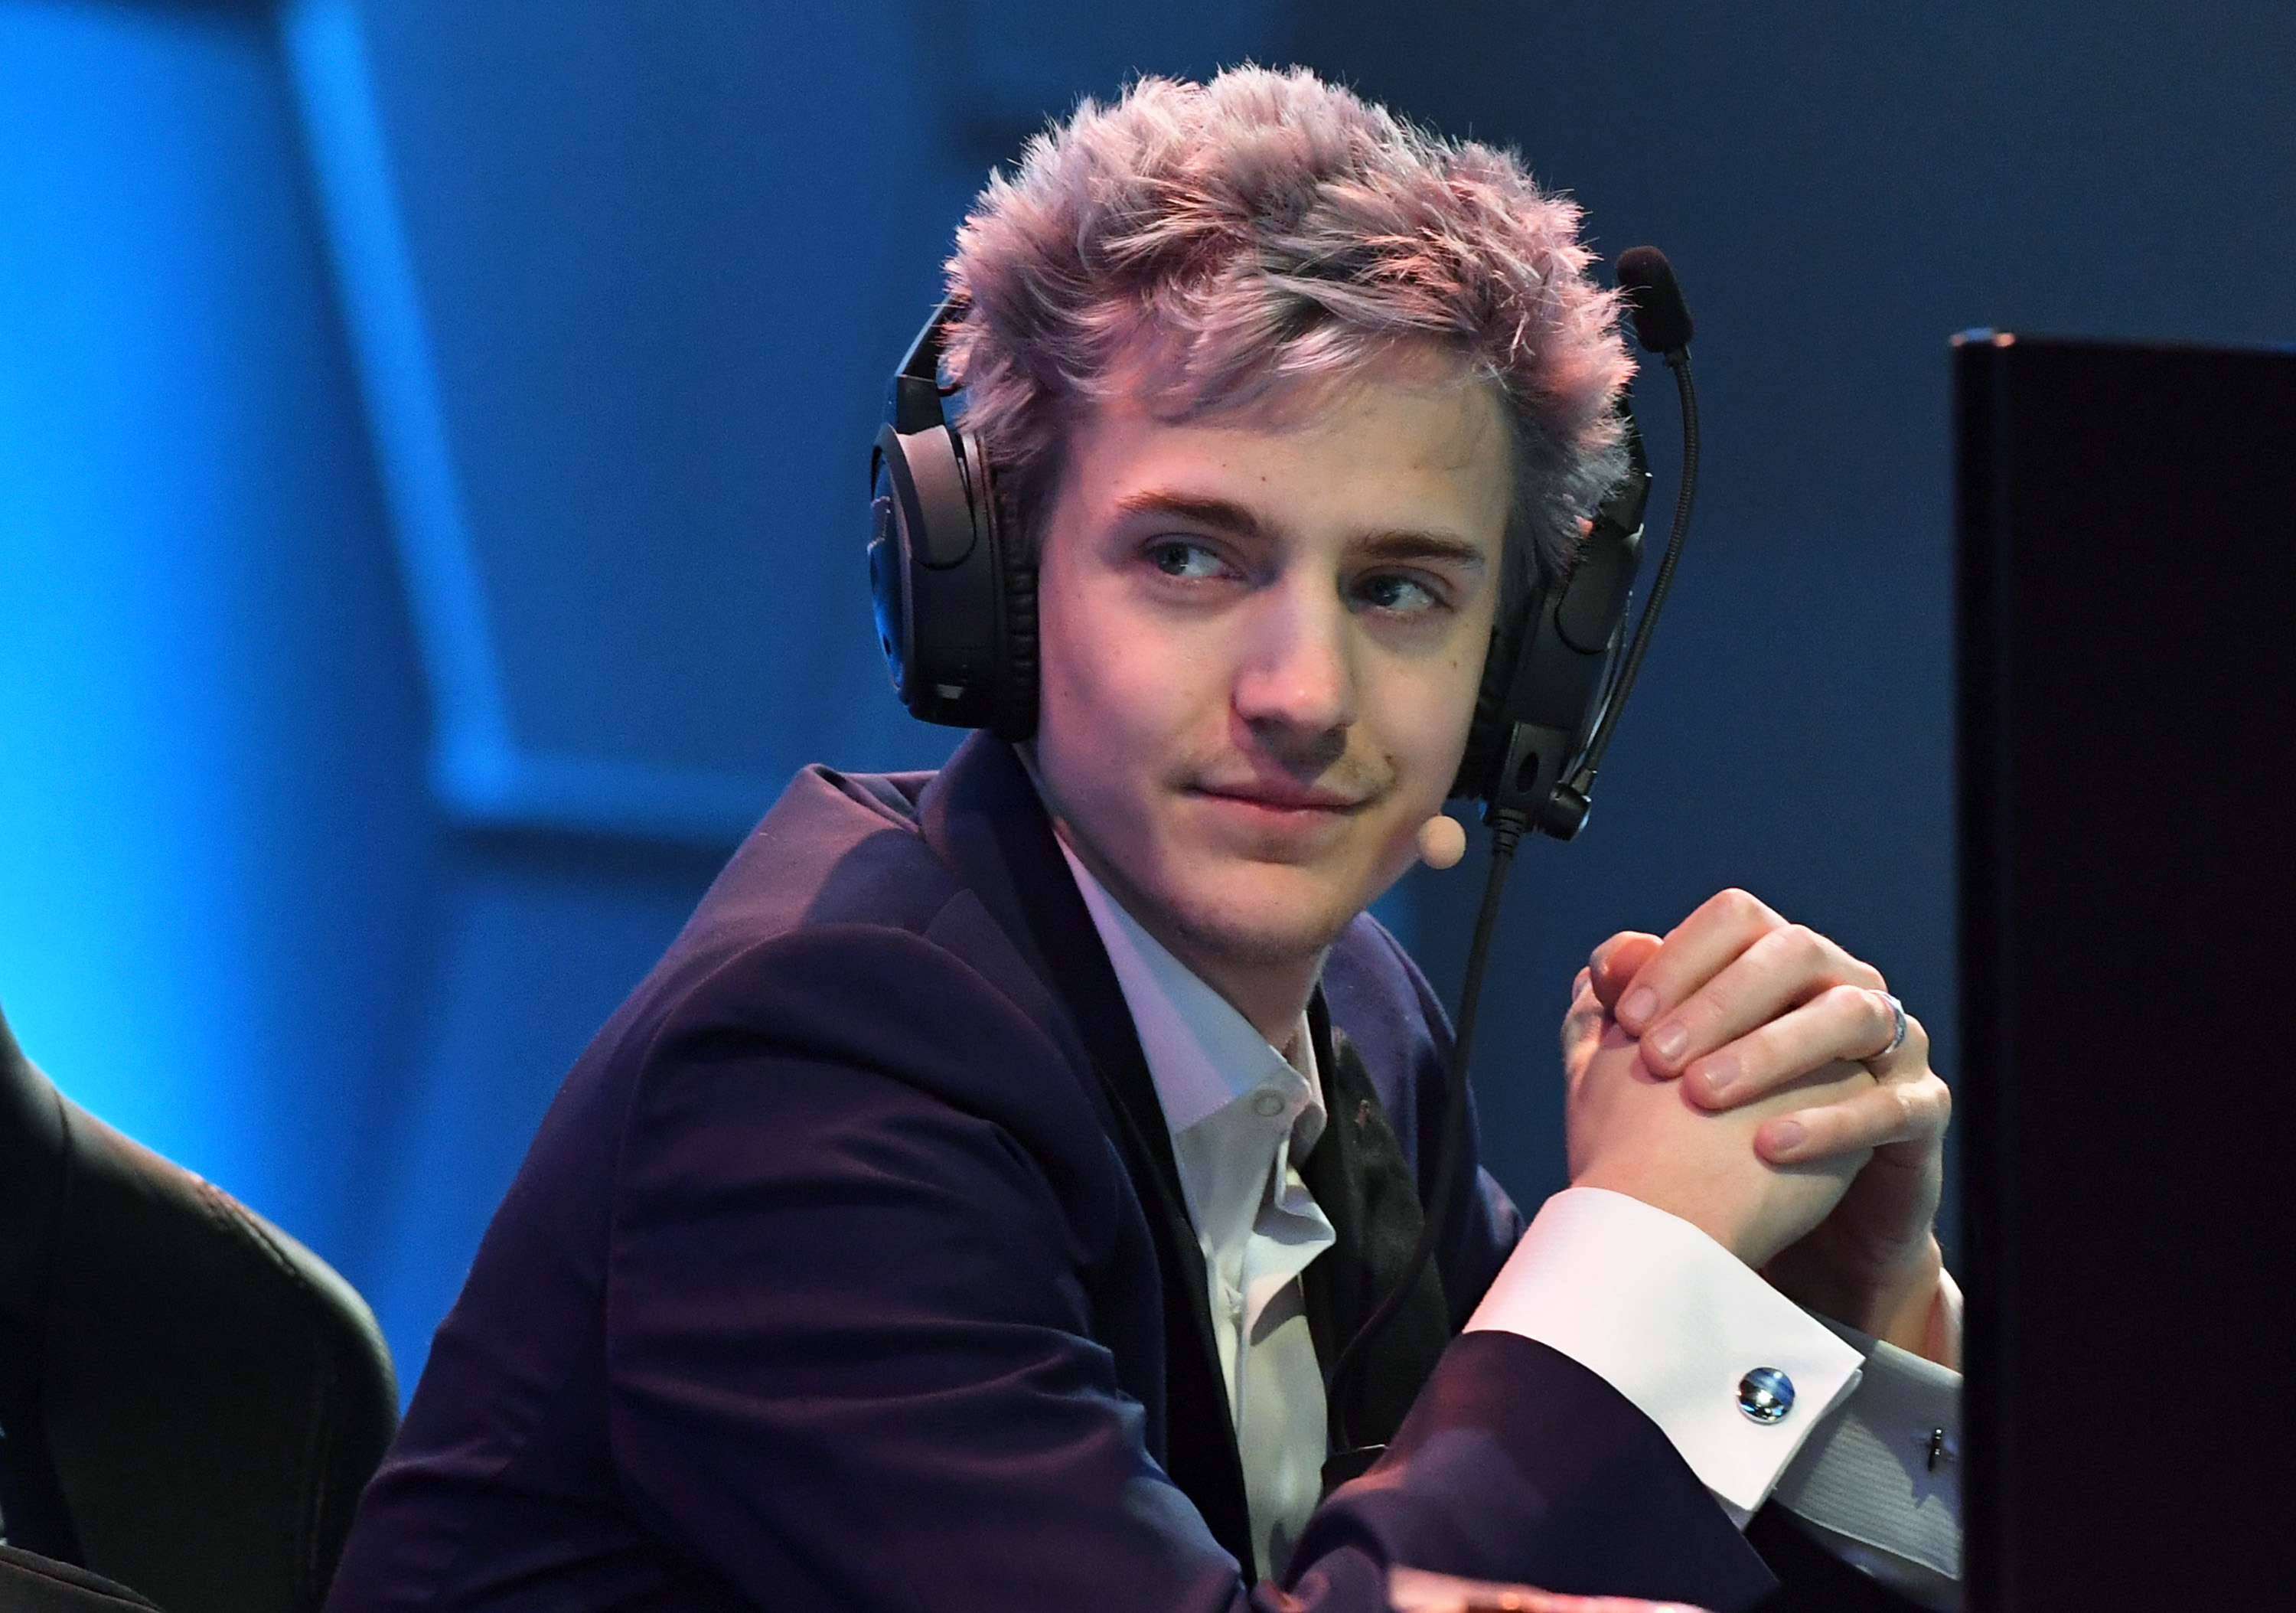 Who Is Ninja? All About Twitch Star Tyler Blevins